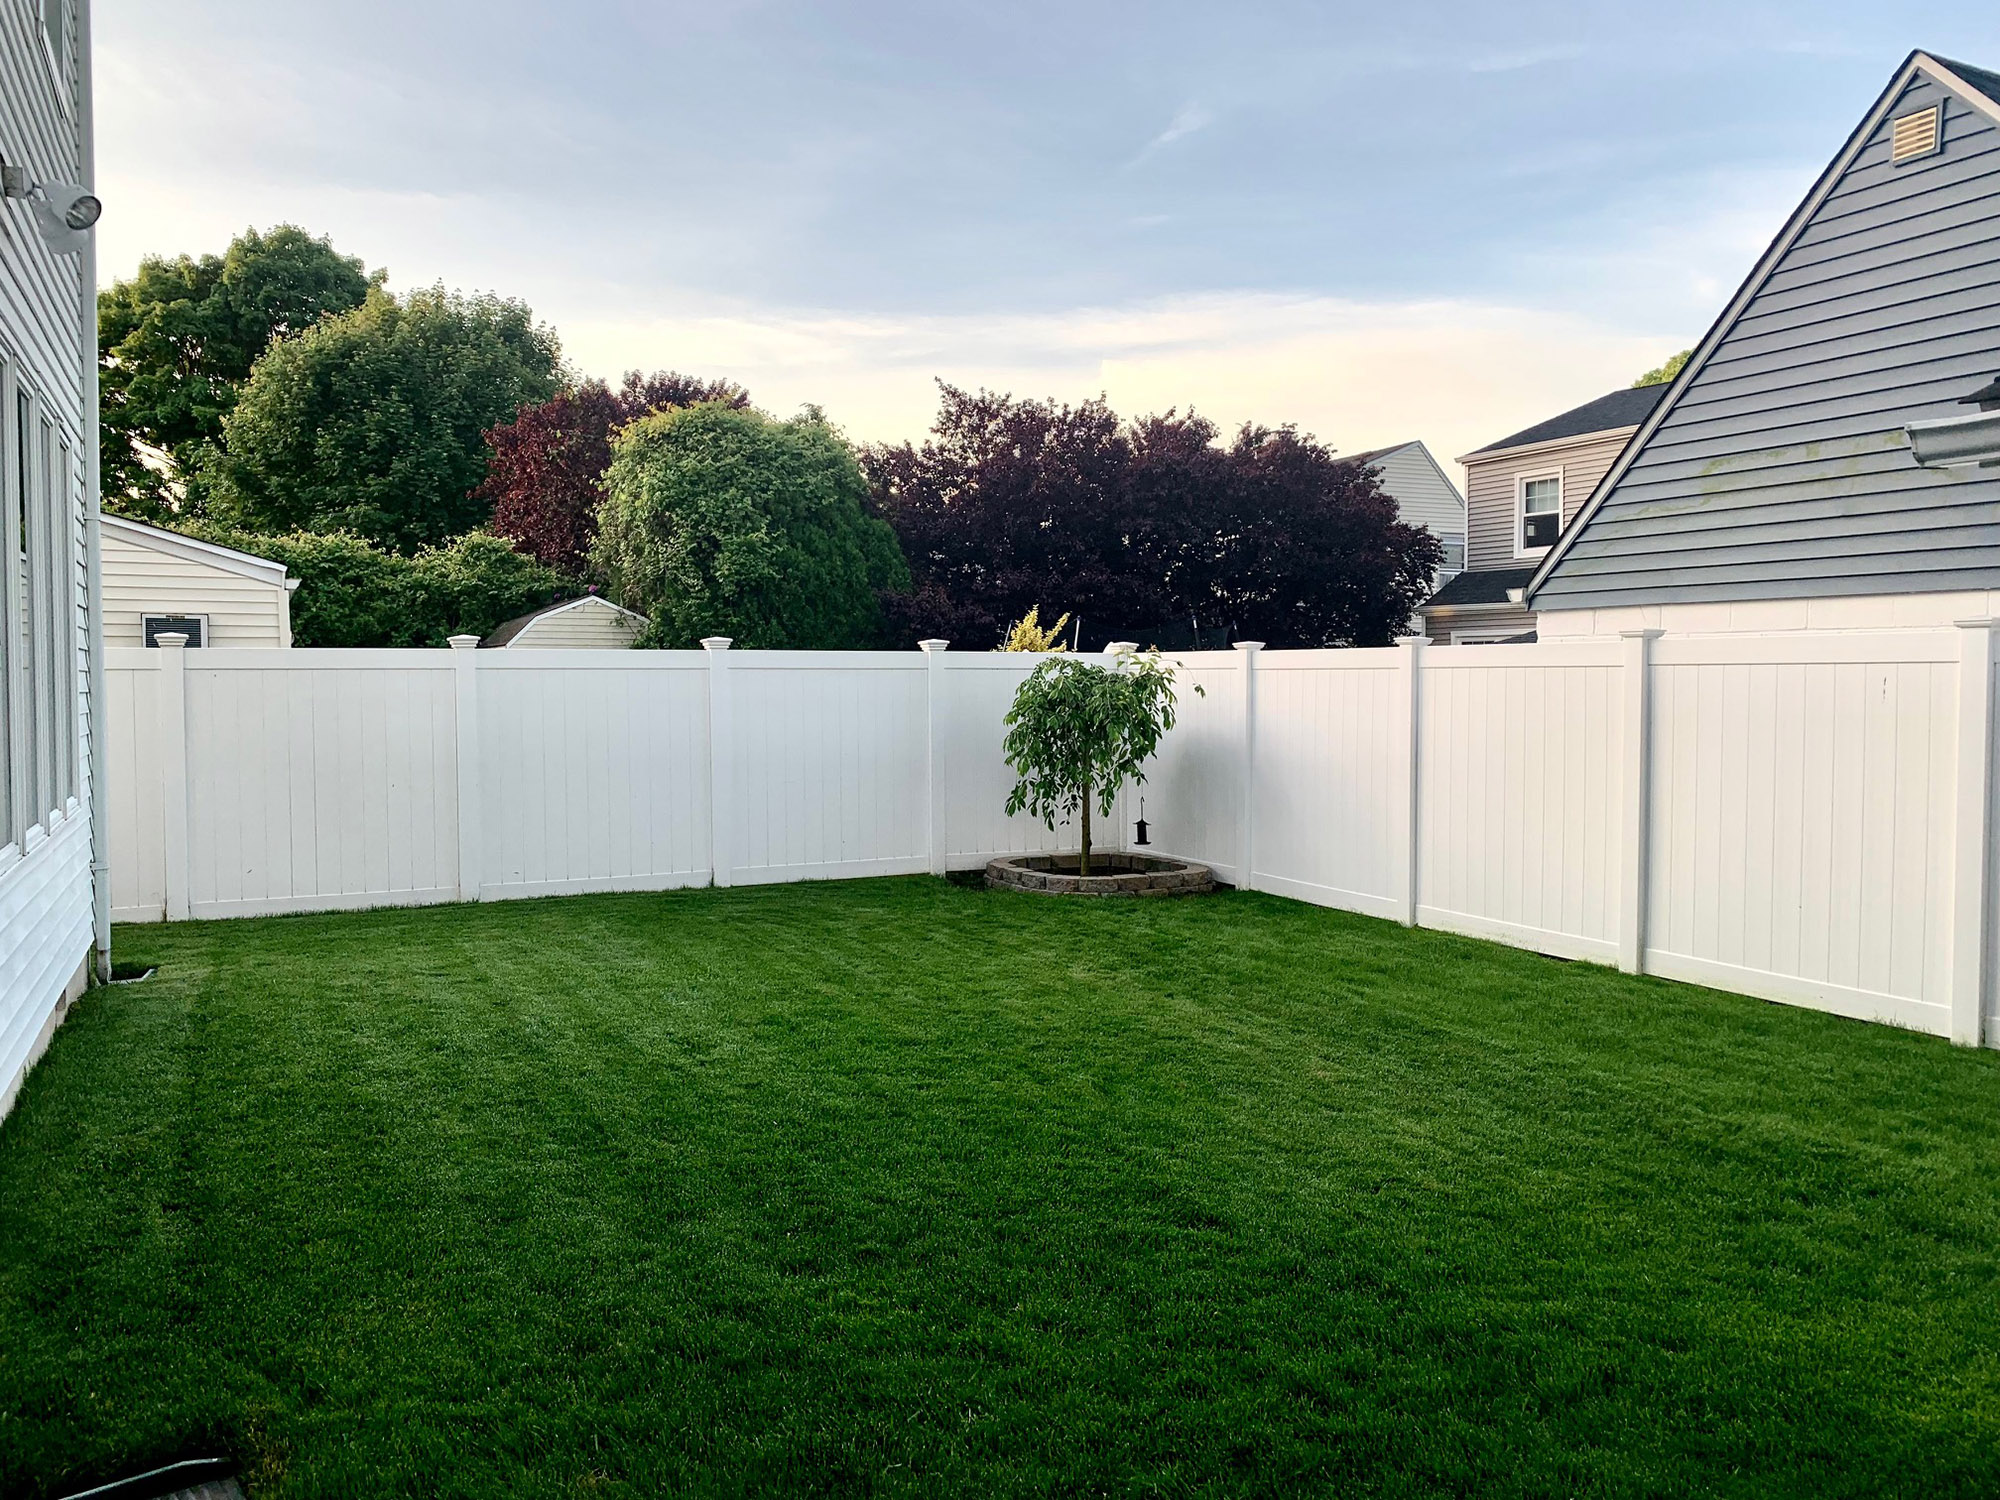 Durables Ashforth Style Hurricane Wind Rated Vinyl Privacy Fence